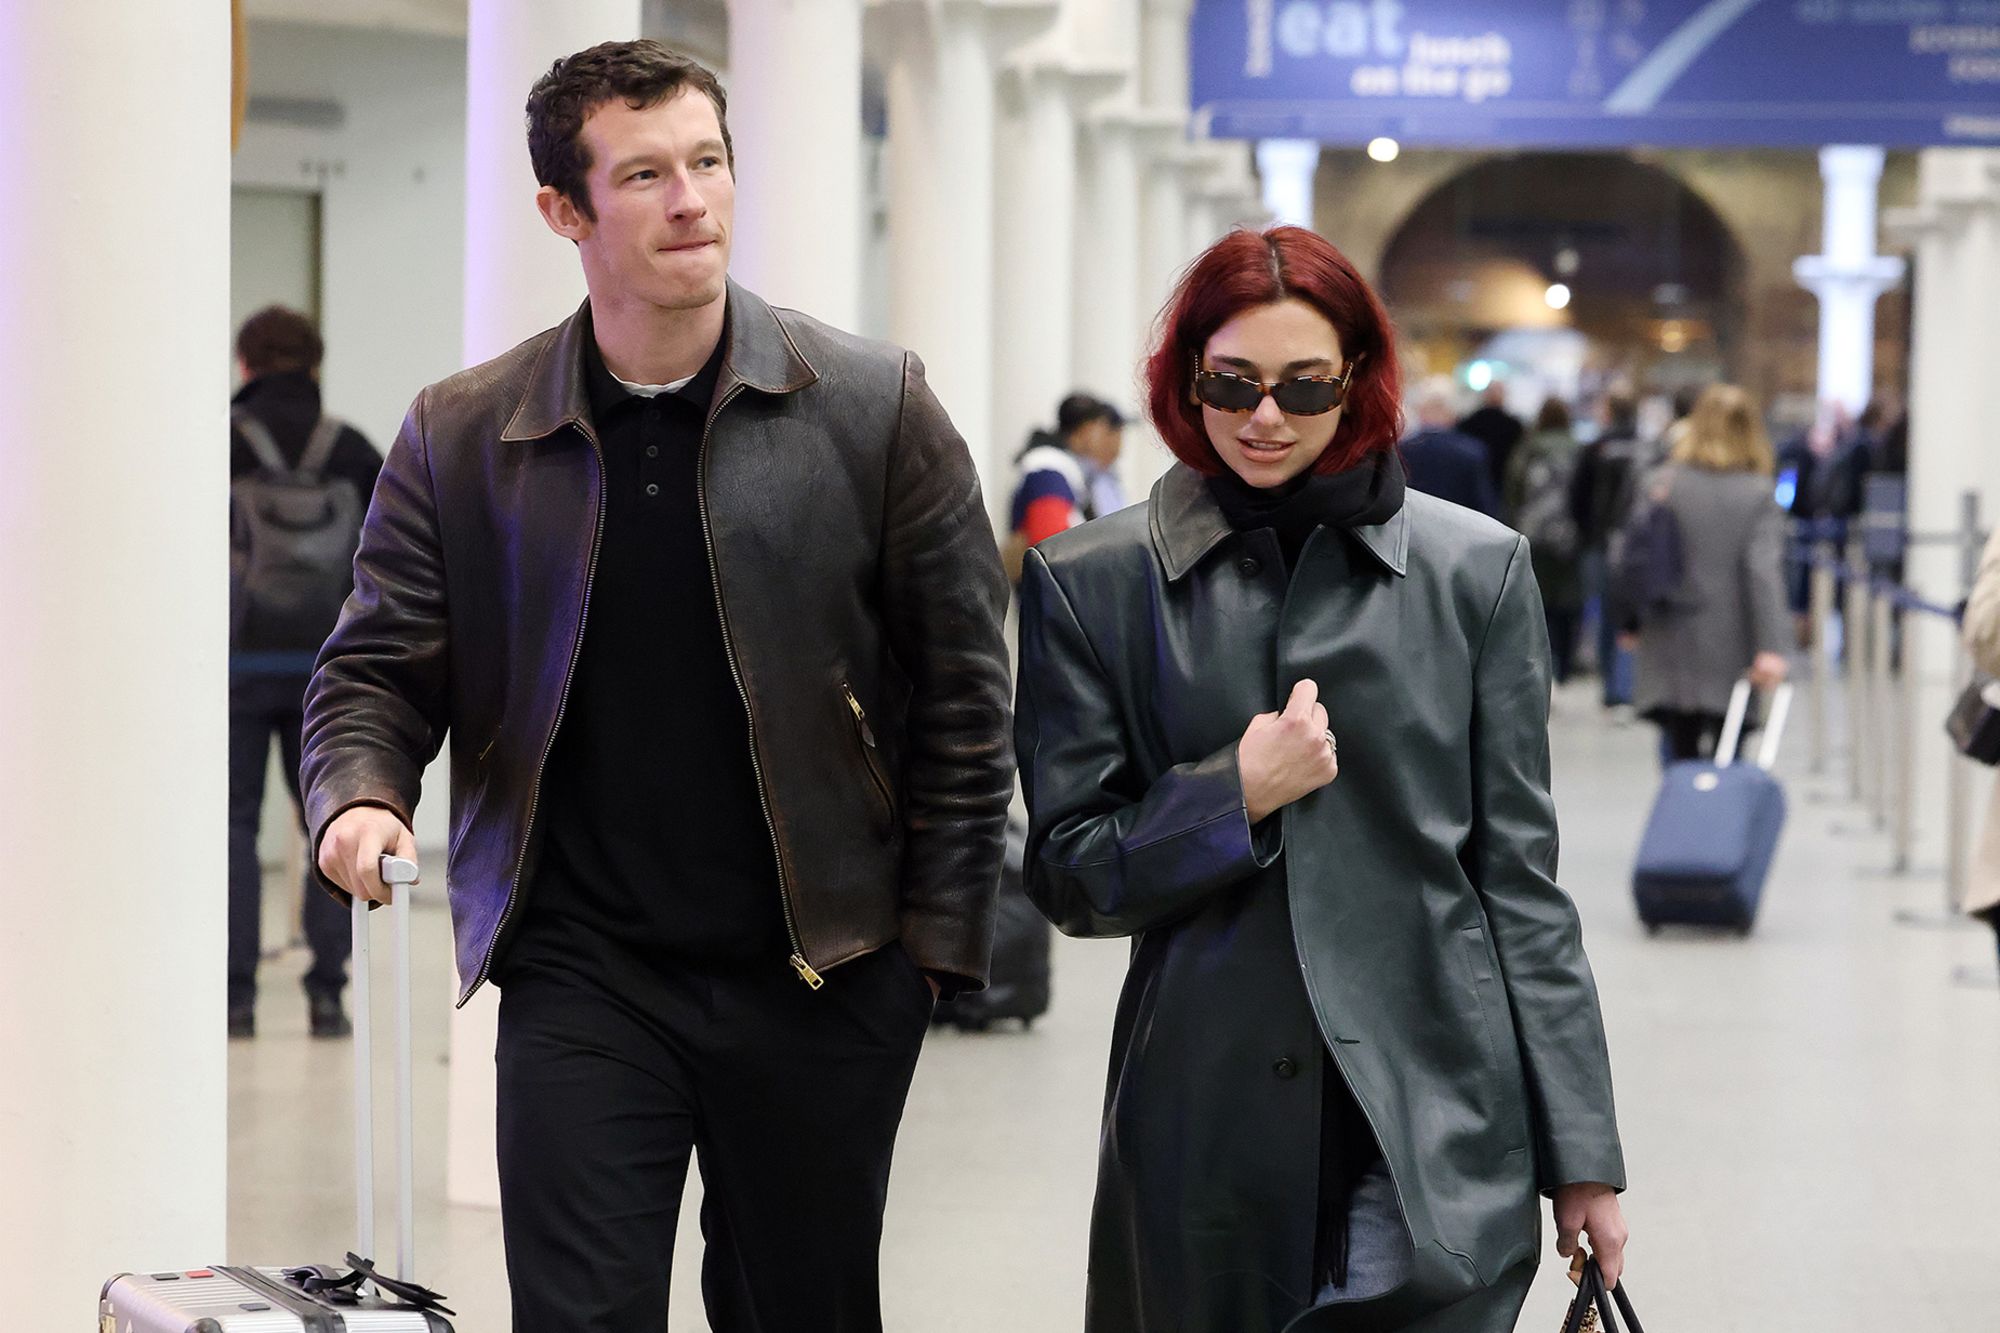 Singer Dua Lipa and actor Callum Turner both wore minimalist-style leather jackets arriving at London St Pancras Station from Paris earlier this week, but their baggage showed a more colorful, personal side to the pair.